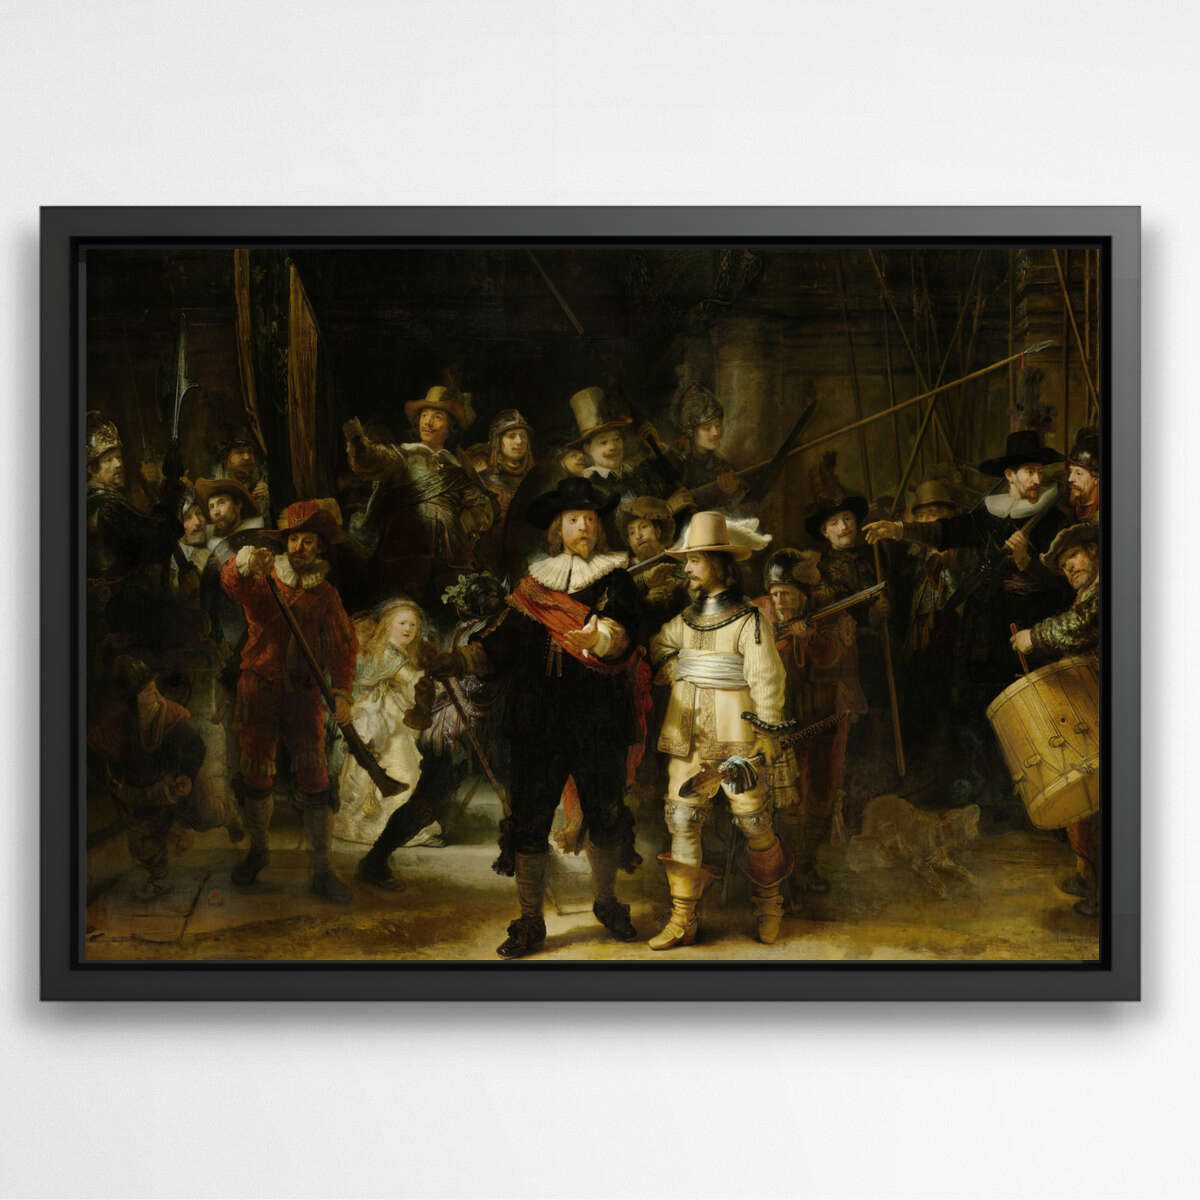 The Night Watch - Rembrandt van Rijn by Lia Morcus on canvas, poster,  wallpaper and more